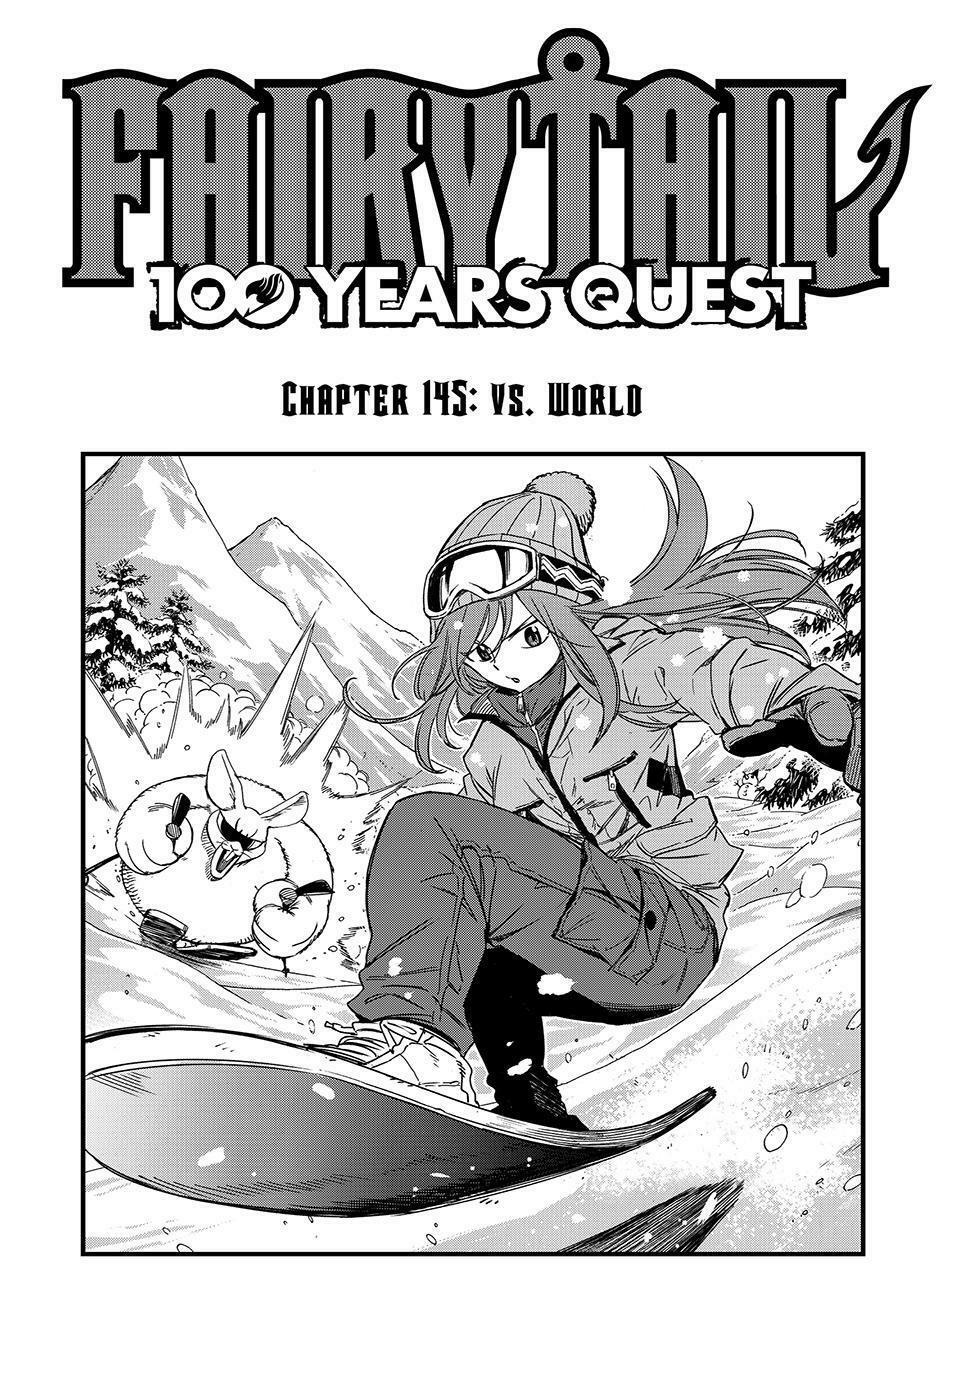 Fairy Tail: 100 Years Quest 147